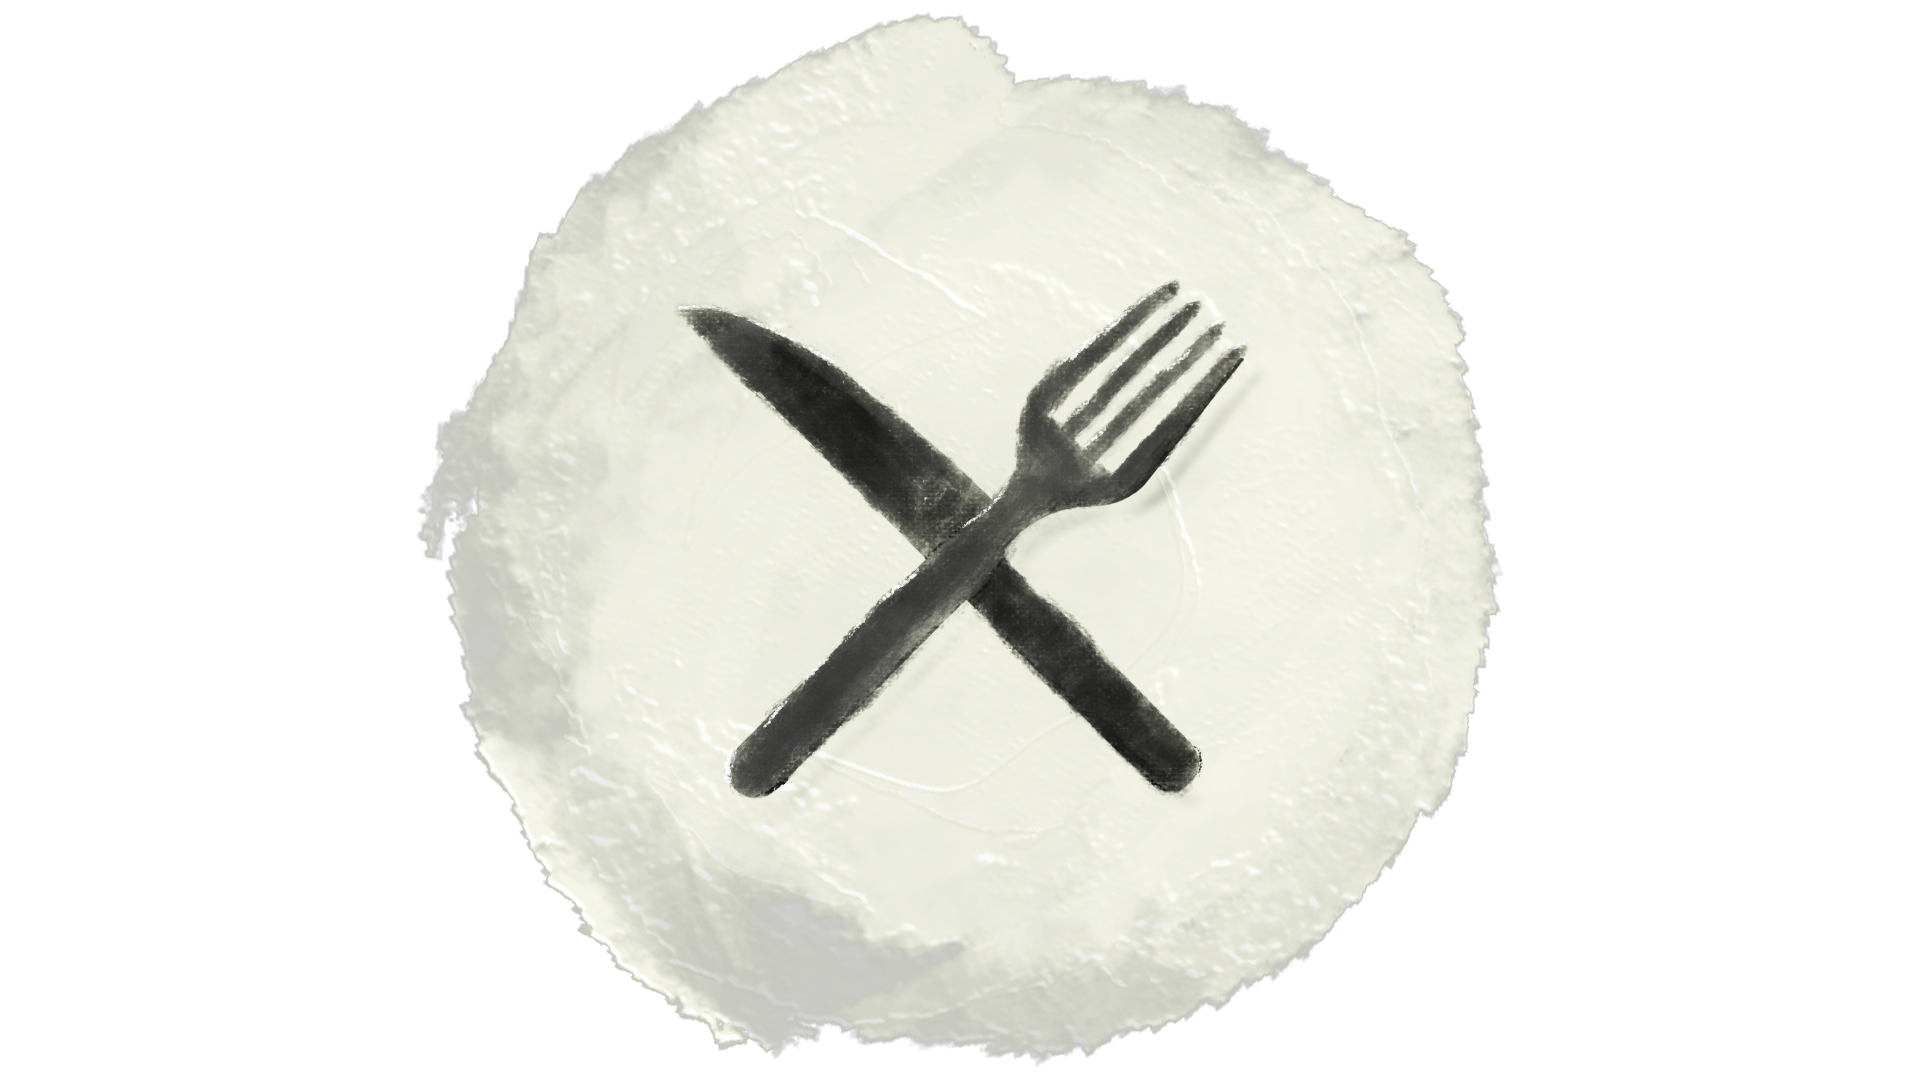 Icon for Unforgettable Luncheon